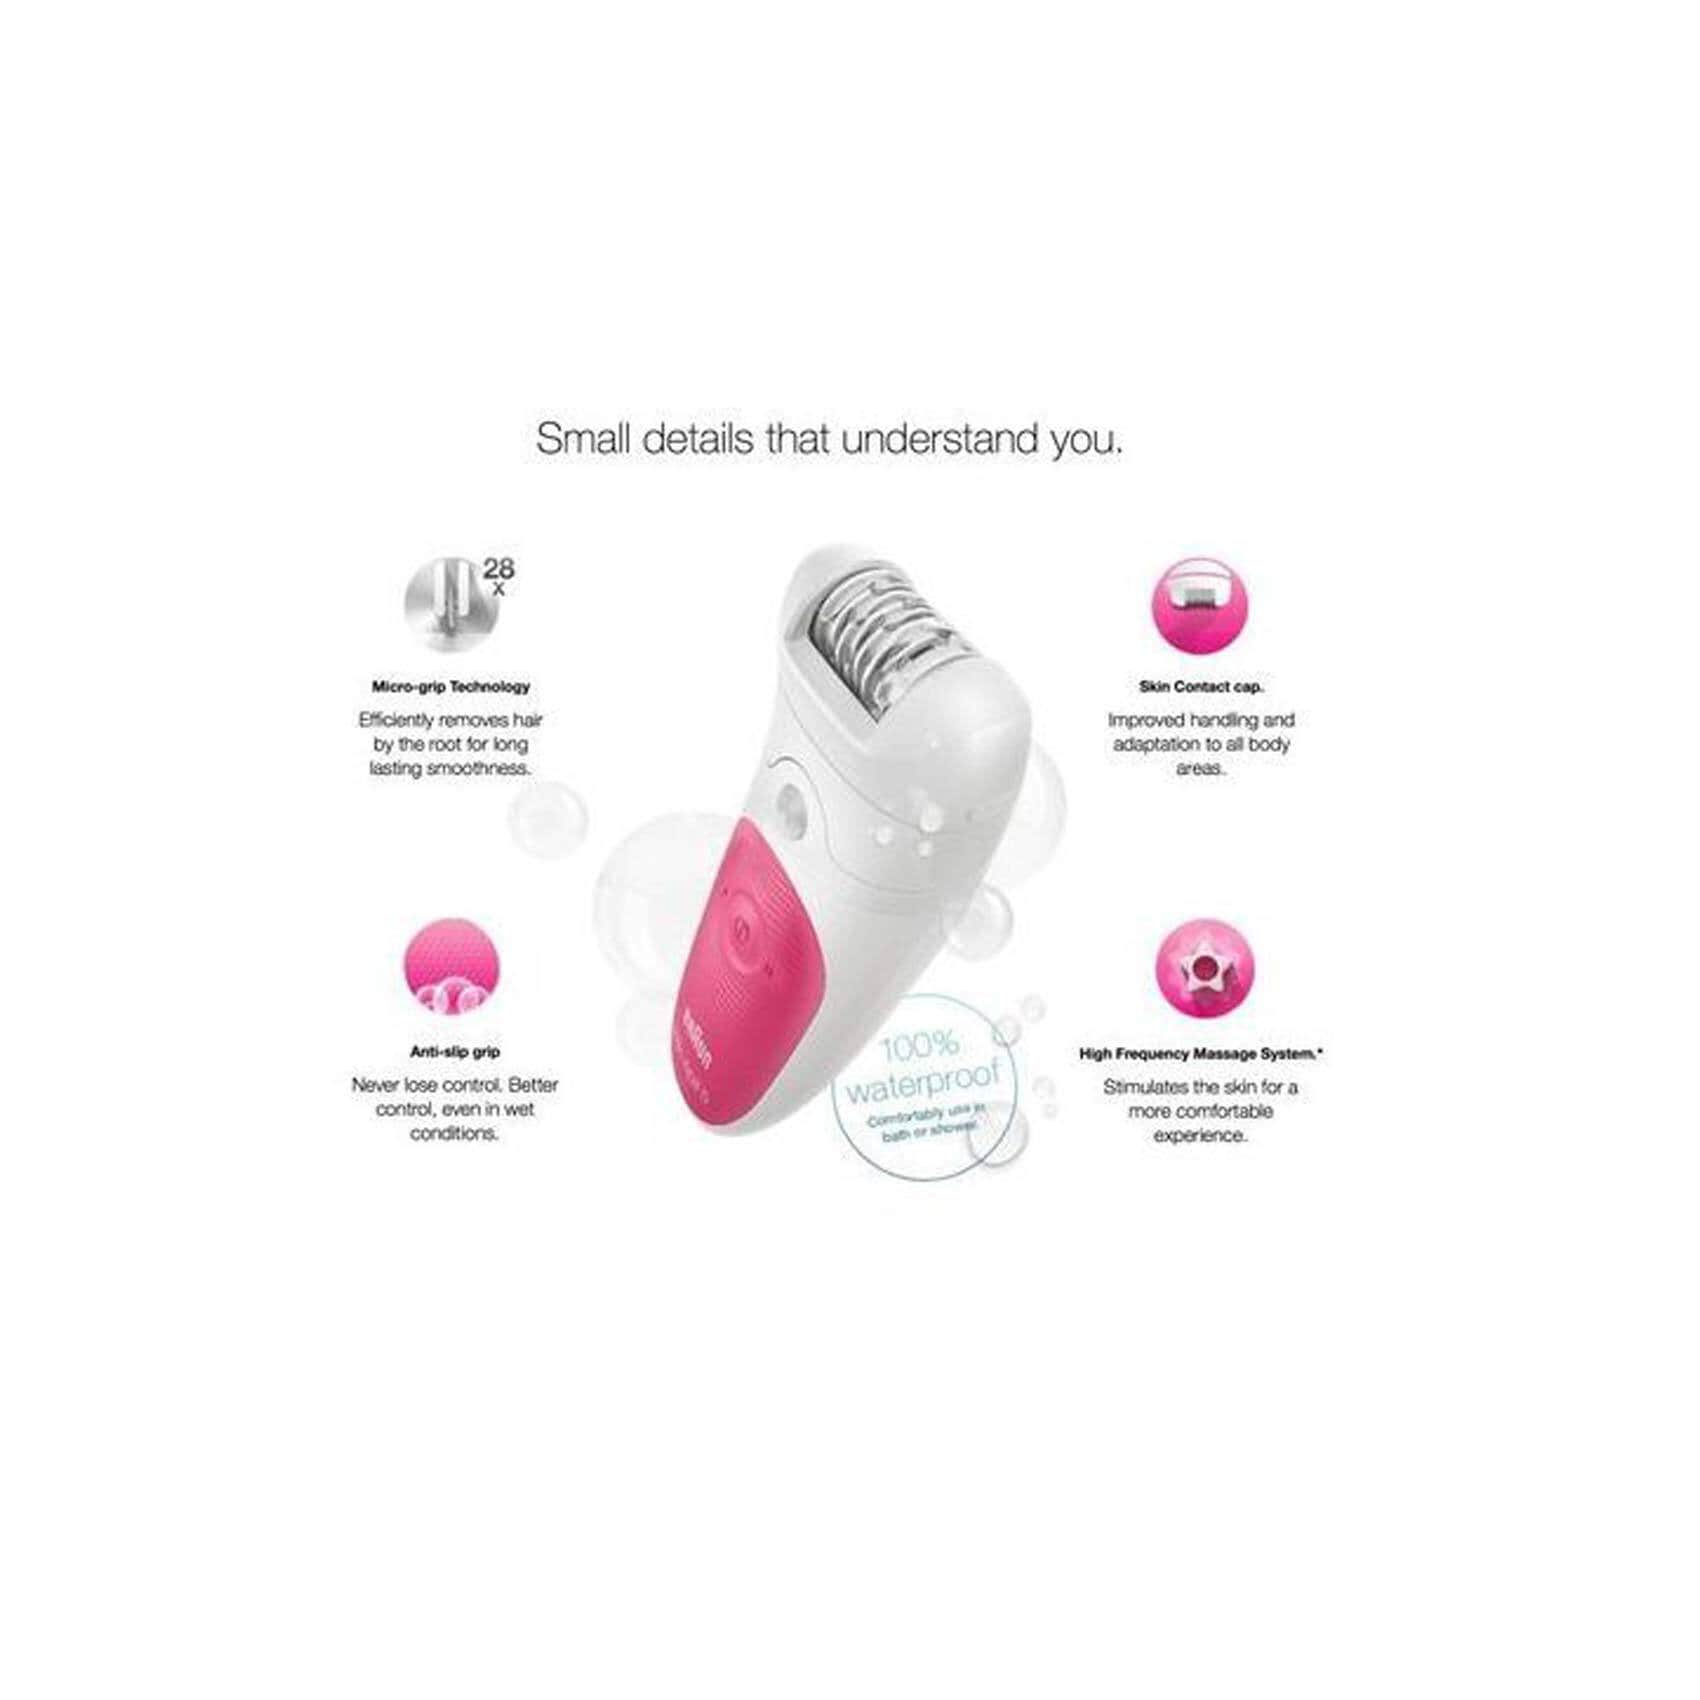 Buy Braun 5-513 Silk Epil 5 Wet and Dry Cordless Epilator - Pink Online -  Shop Beauty & Personal Care on Carrefour Egypt